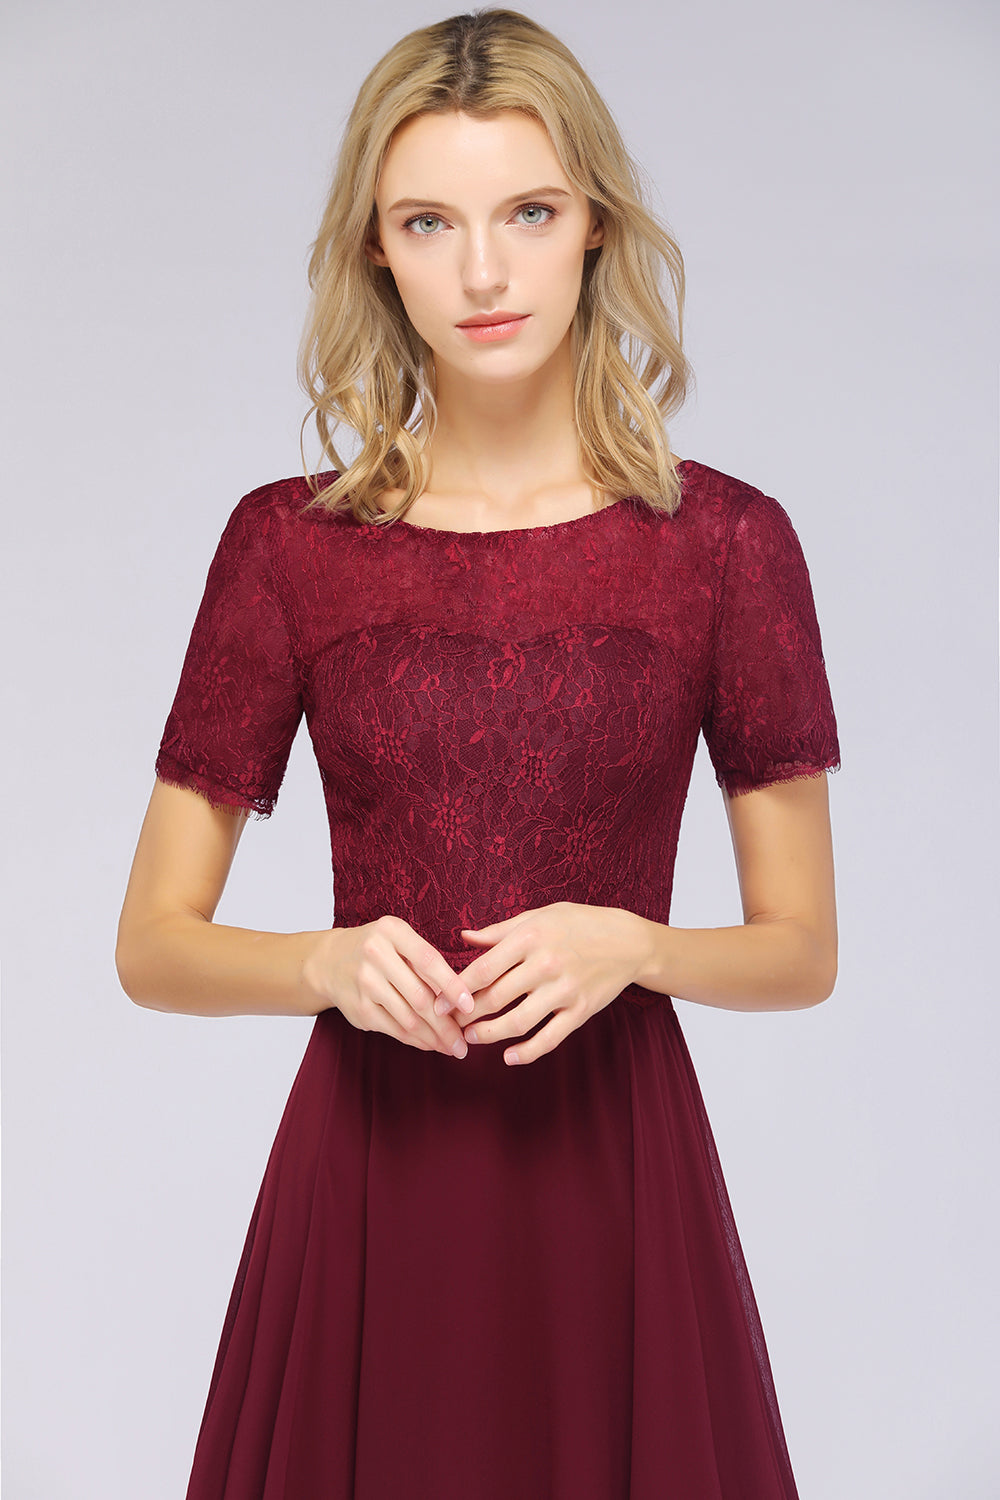 Chic Lace Long Burgundy Backless Bridesmaid Dress With Short-Sleeves-27dress